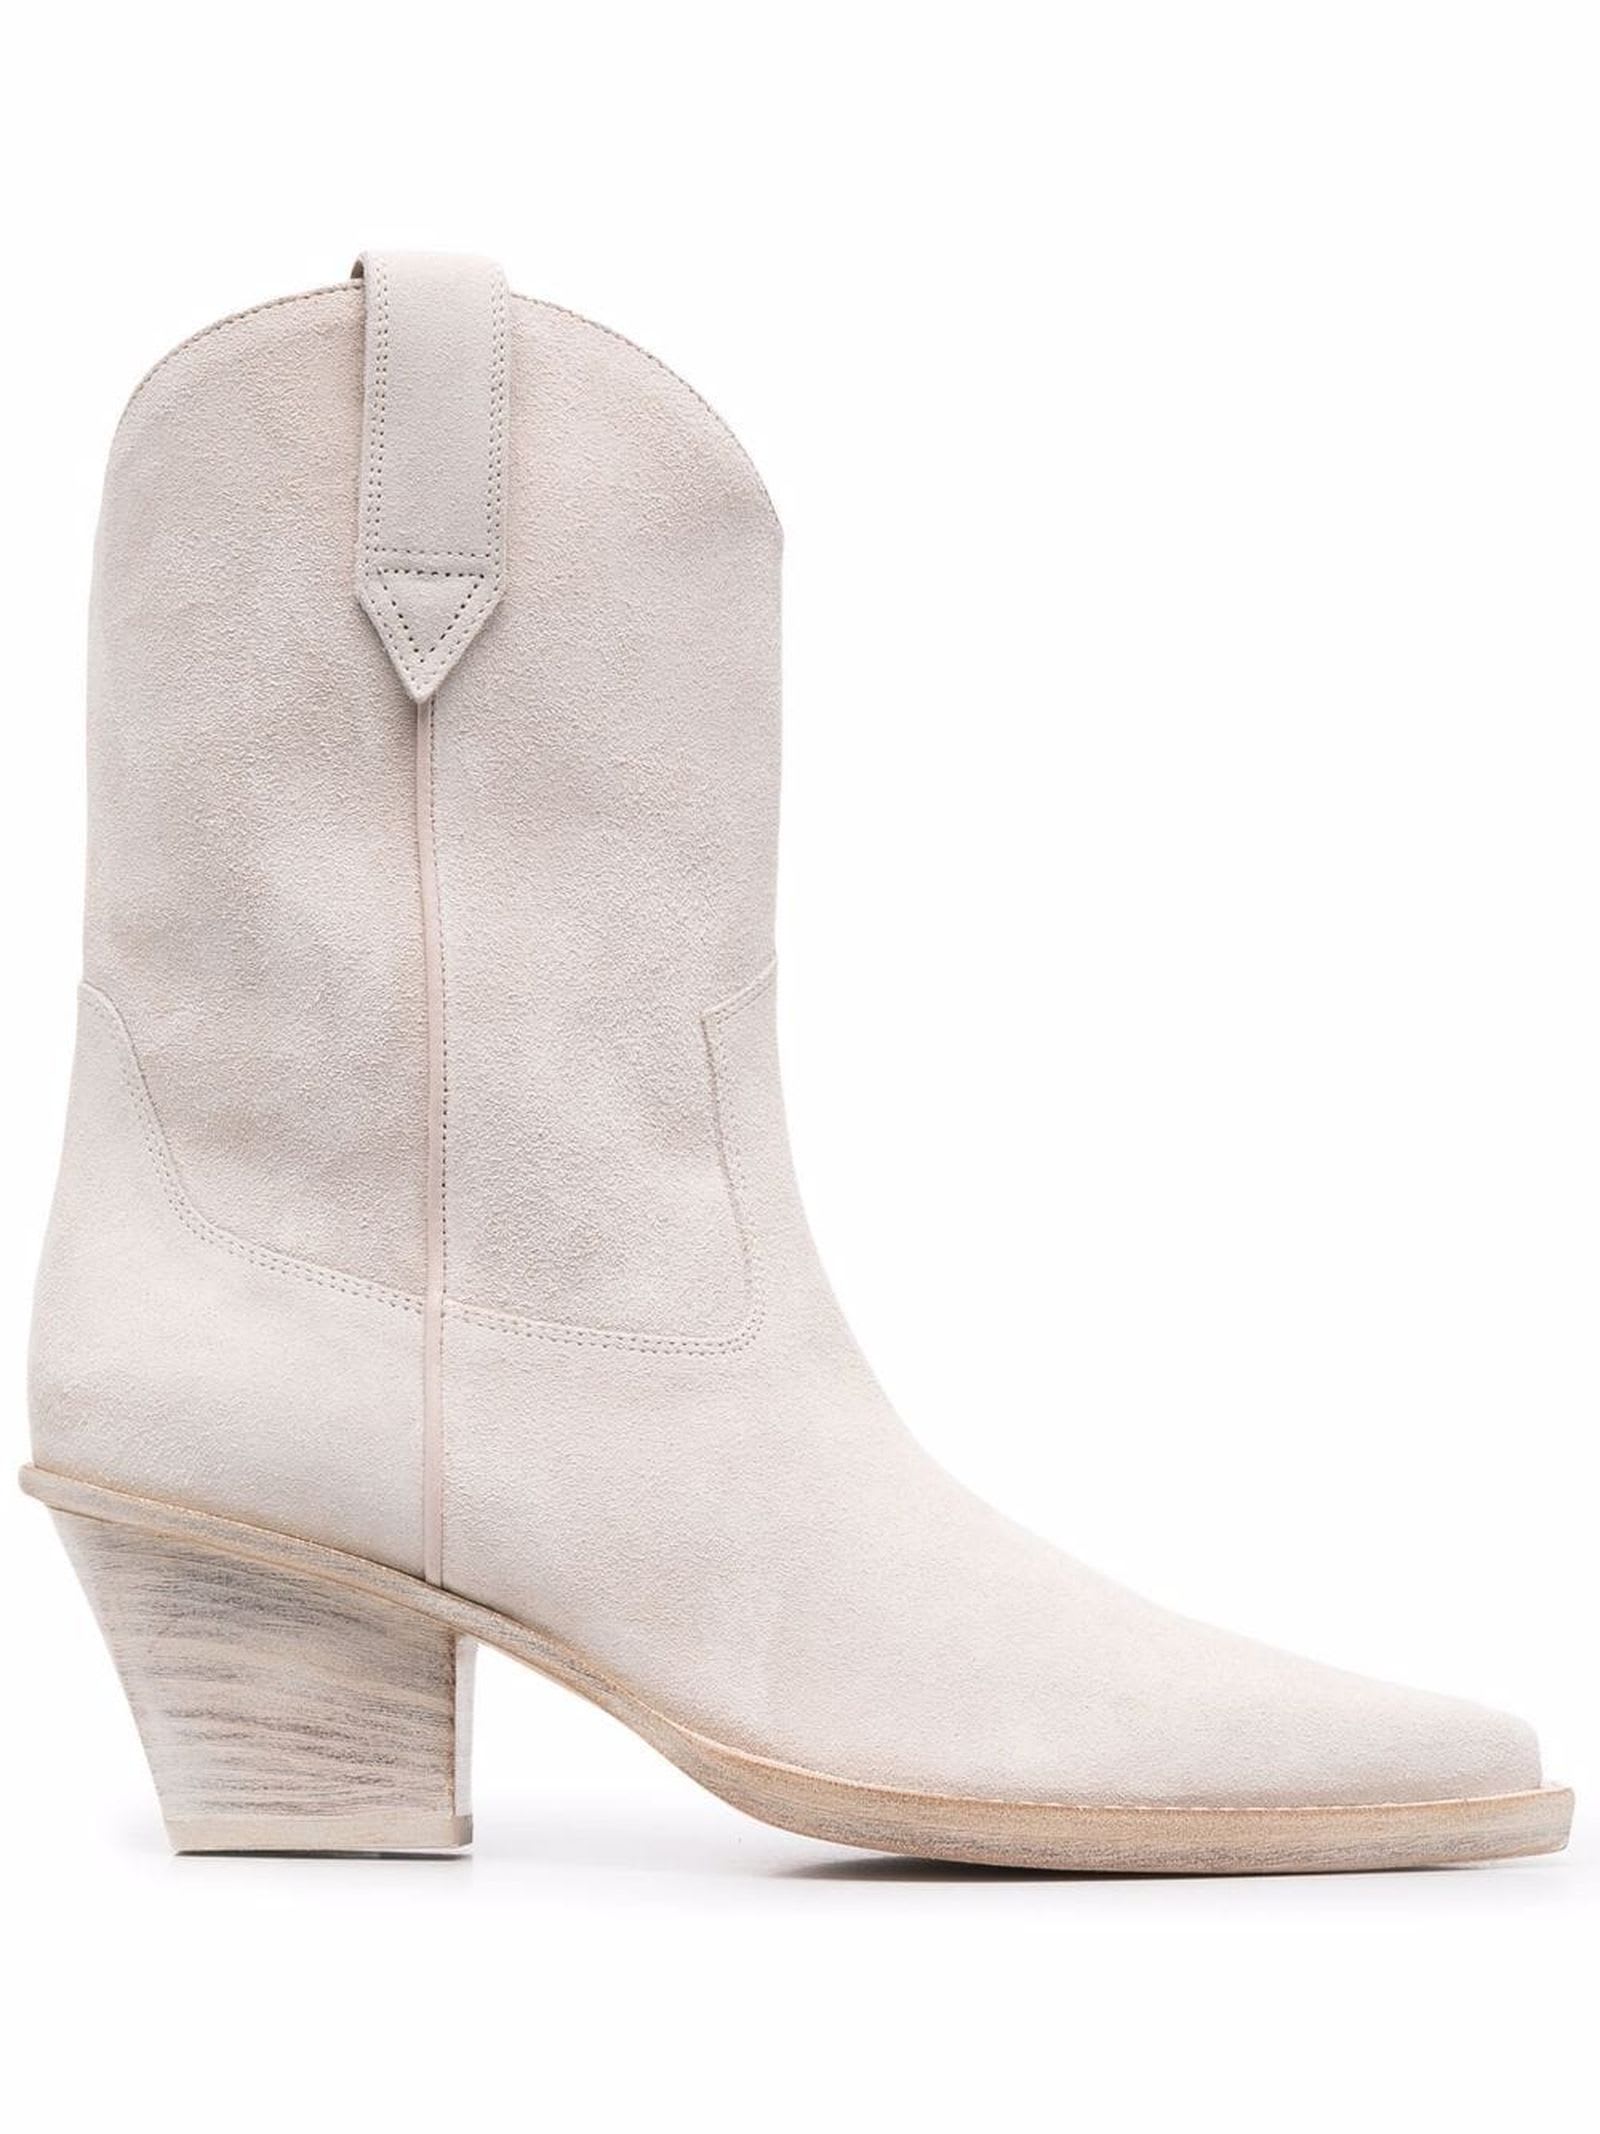 Paris Texas Off White Suede Western-style Boots